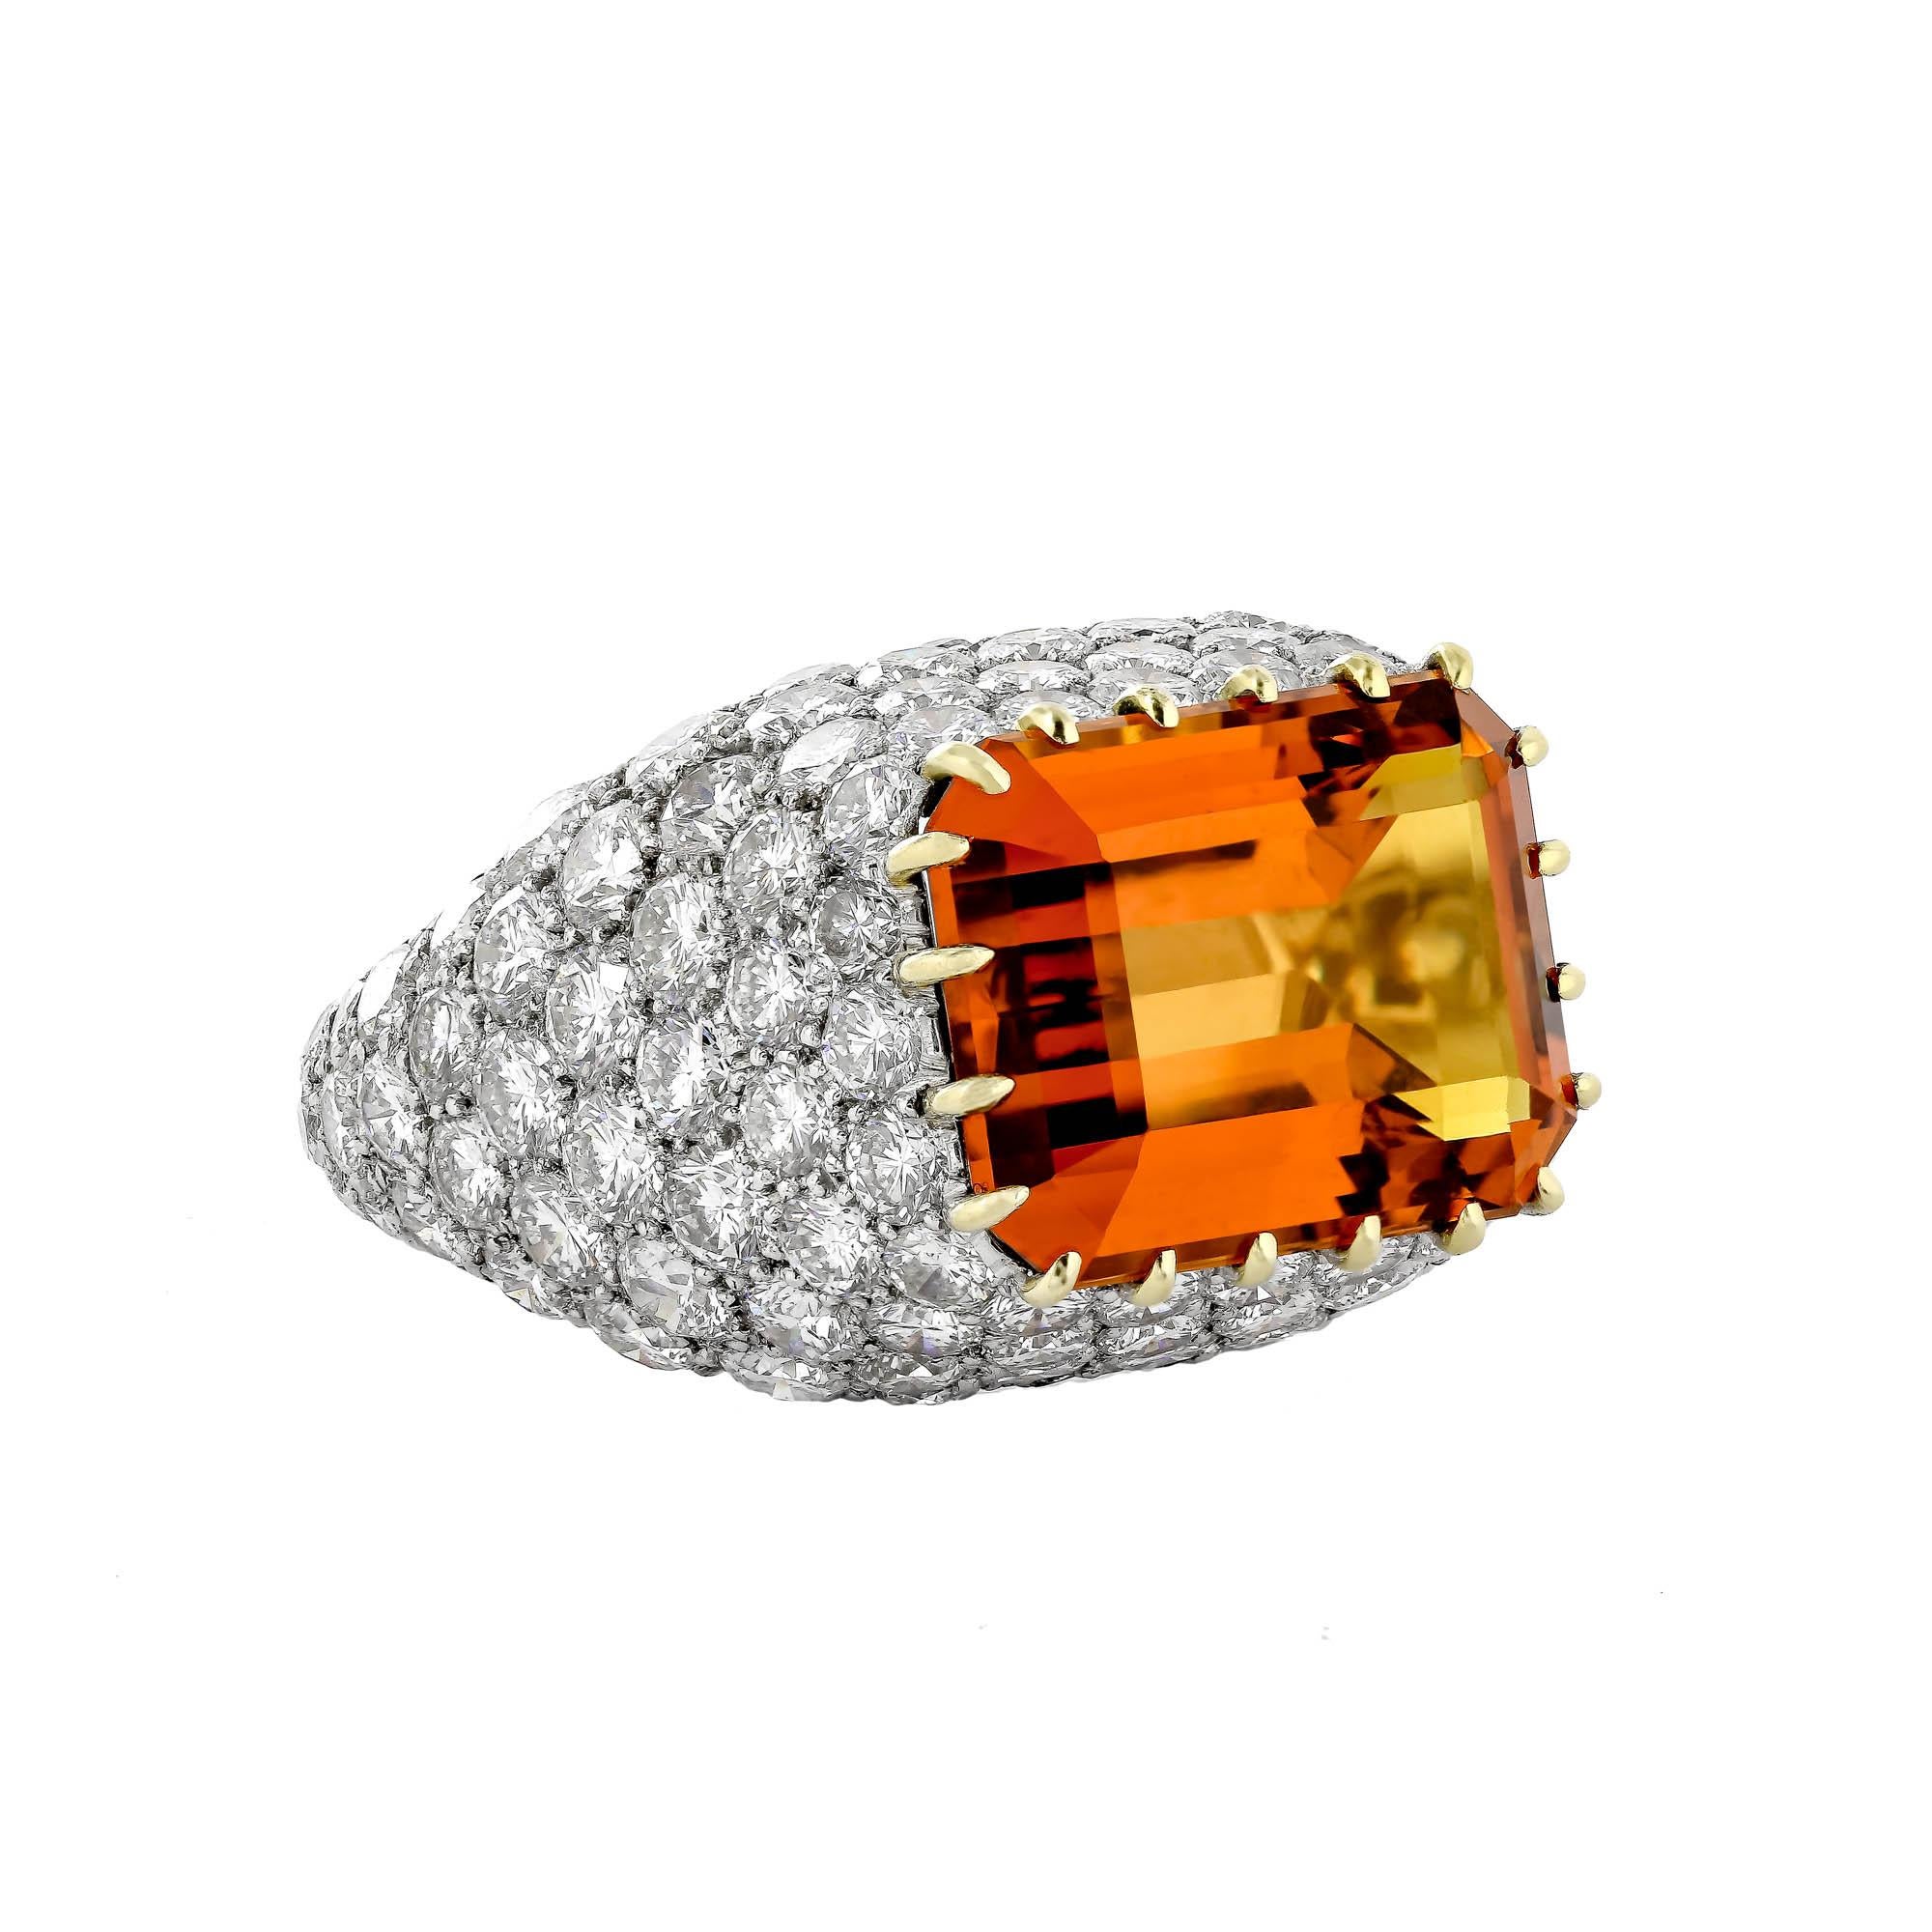 Stunning Tiffany & Co 8.00 carat yellow topaz and diamond ring featuring one no-heat 8.00 carat yellow topaz (weight is approximate) set with round brilliant cut diamonds, circa 1980, size 7.



yellow topaz and diamond ring featuring an 8.00 Carat